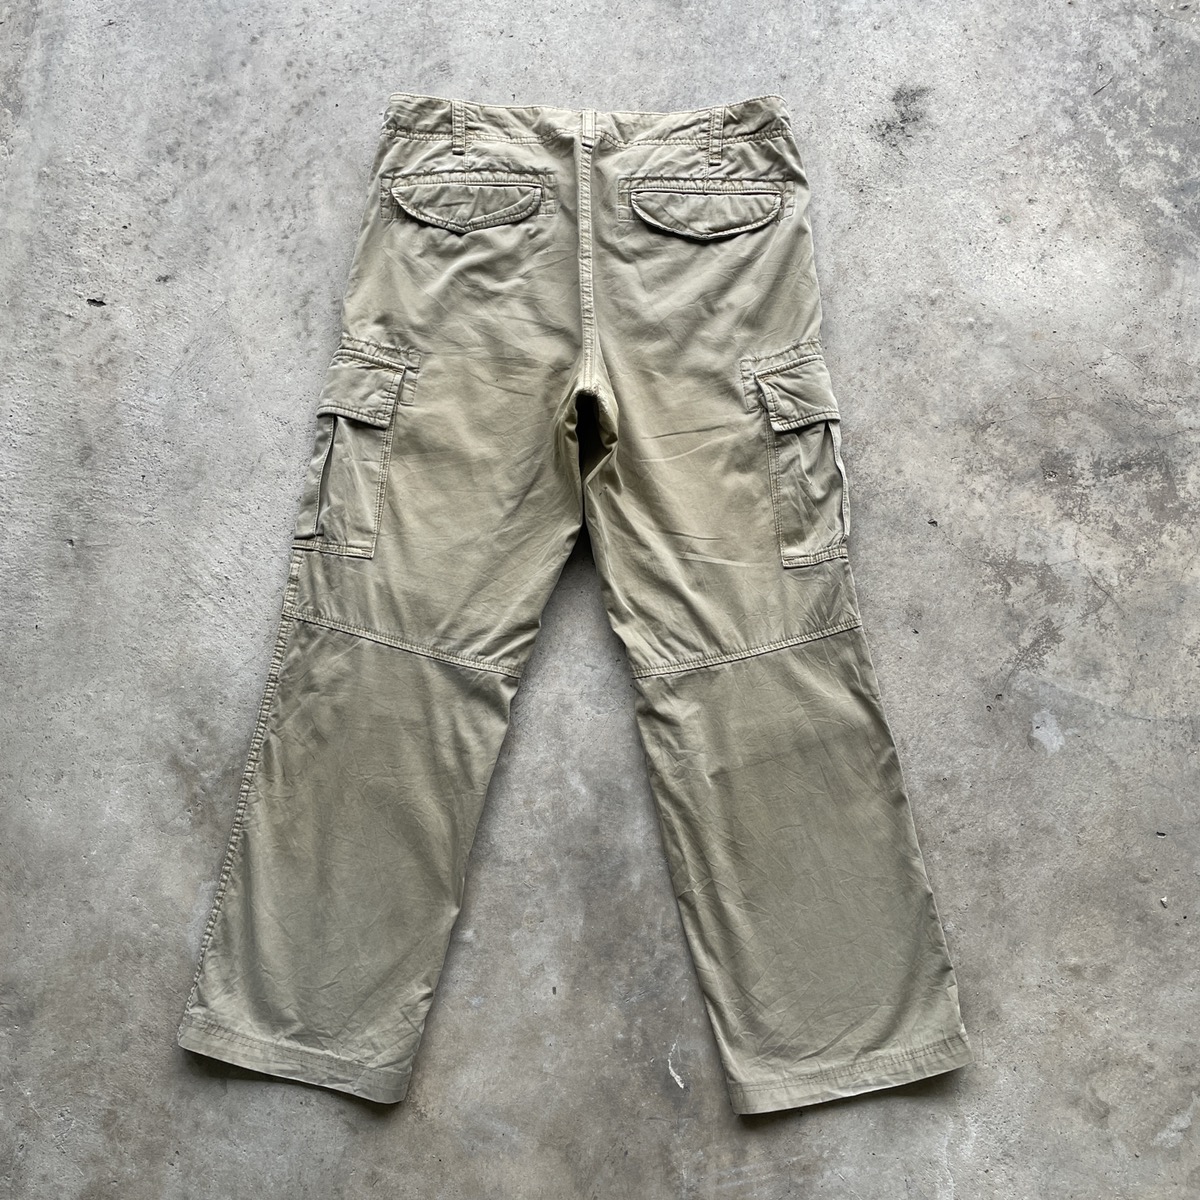 Vintage - Japanese Brand Faded Multipocket Tactical Cargo Pants W33x28 - 13